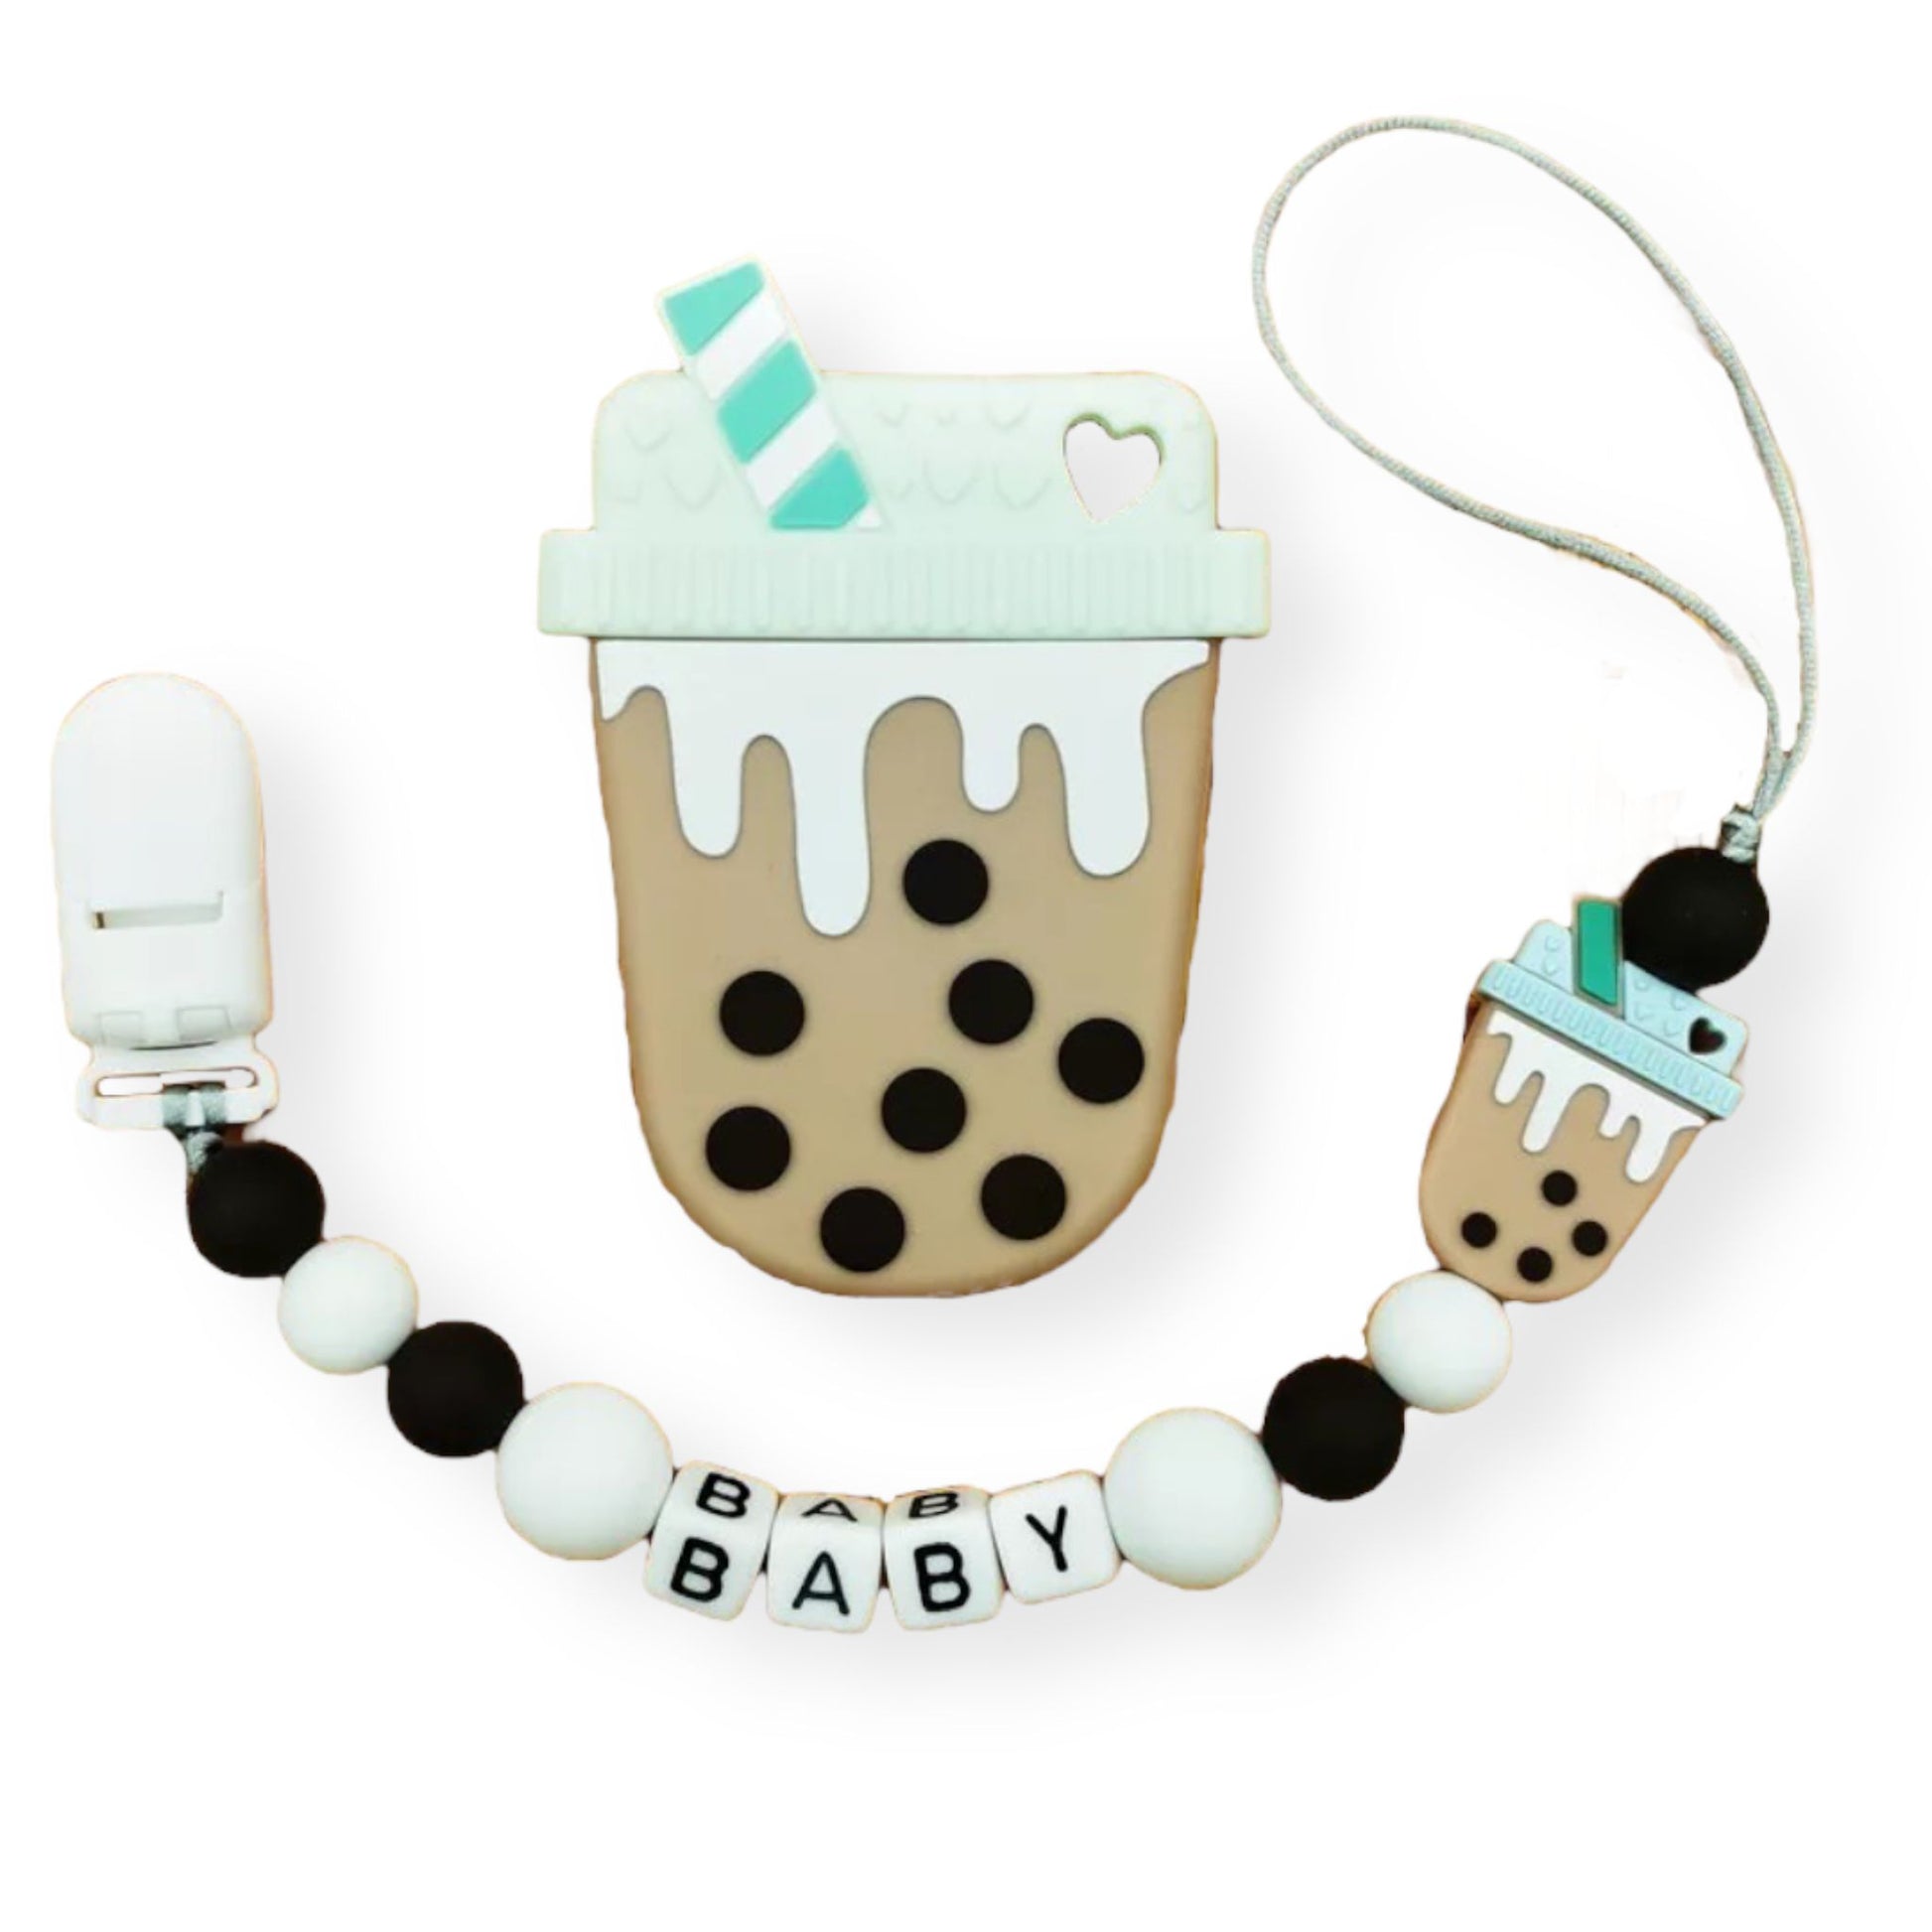 black and brown bubble tea personalized pacifier holder with baby's name with silicone teether set for baby 